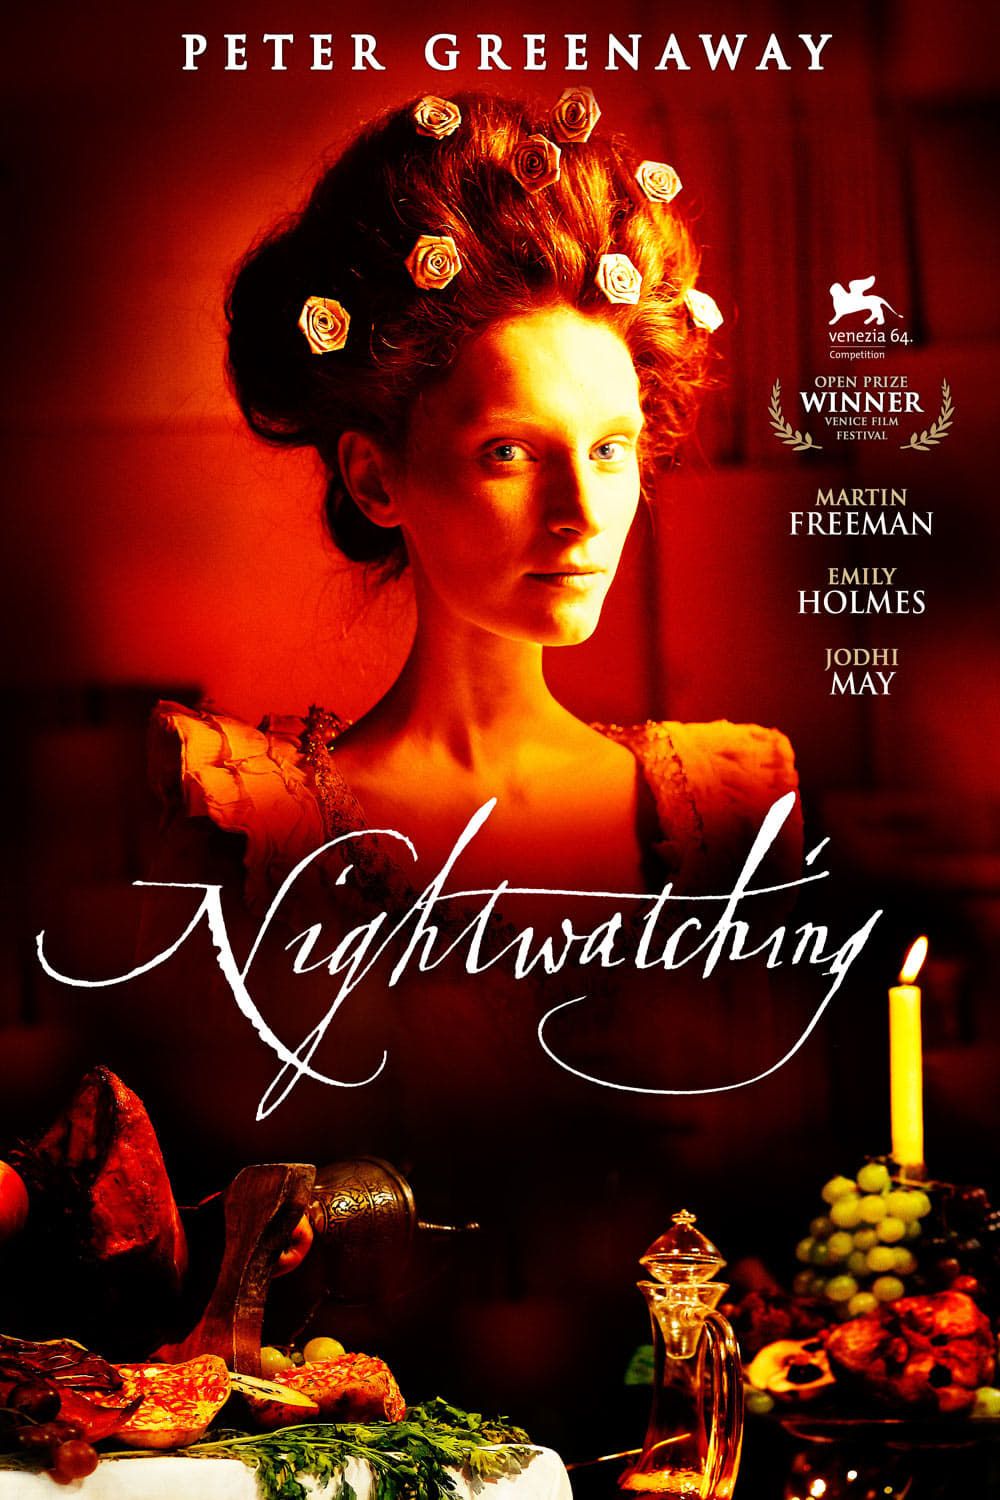 [18+] Nightwatching (2007) Hindi Dubbed UNRATED BluRay download full movie